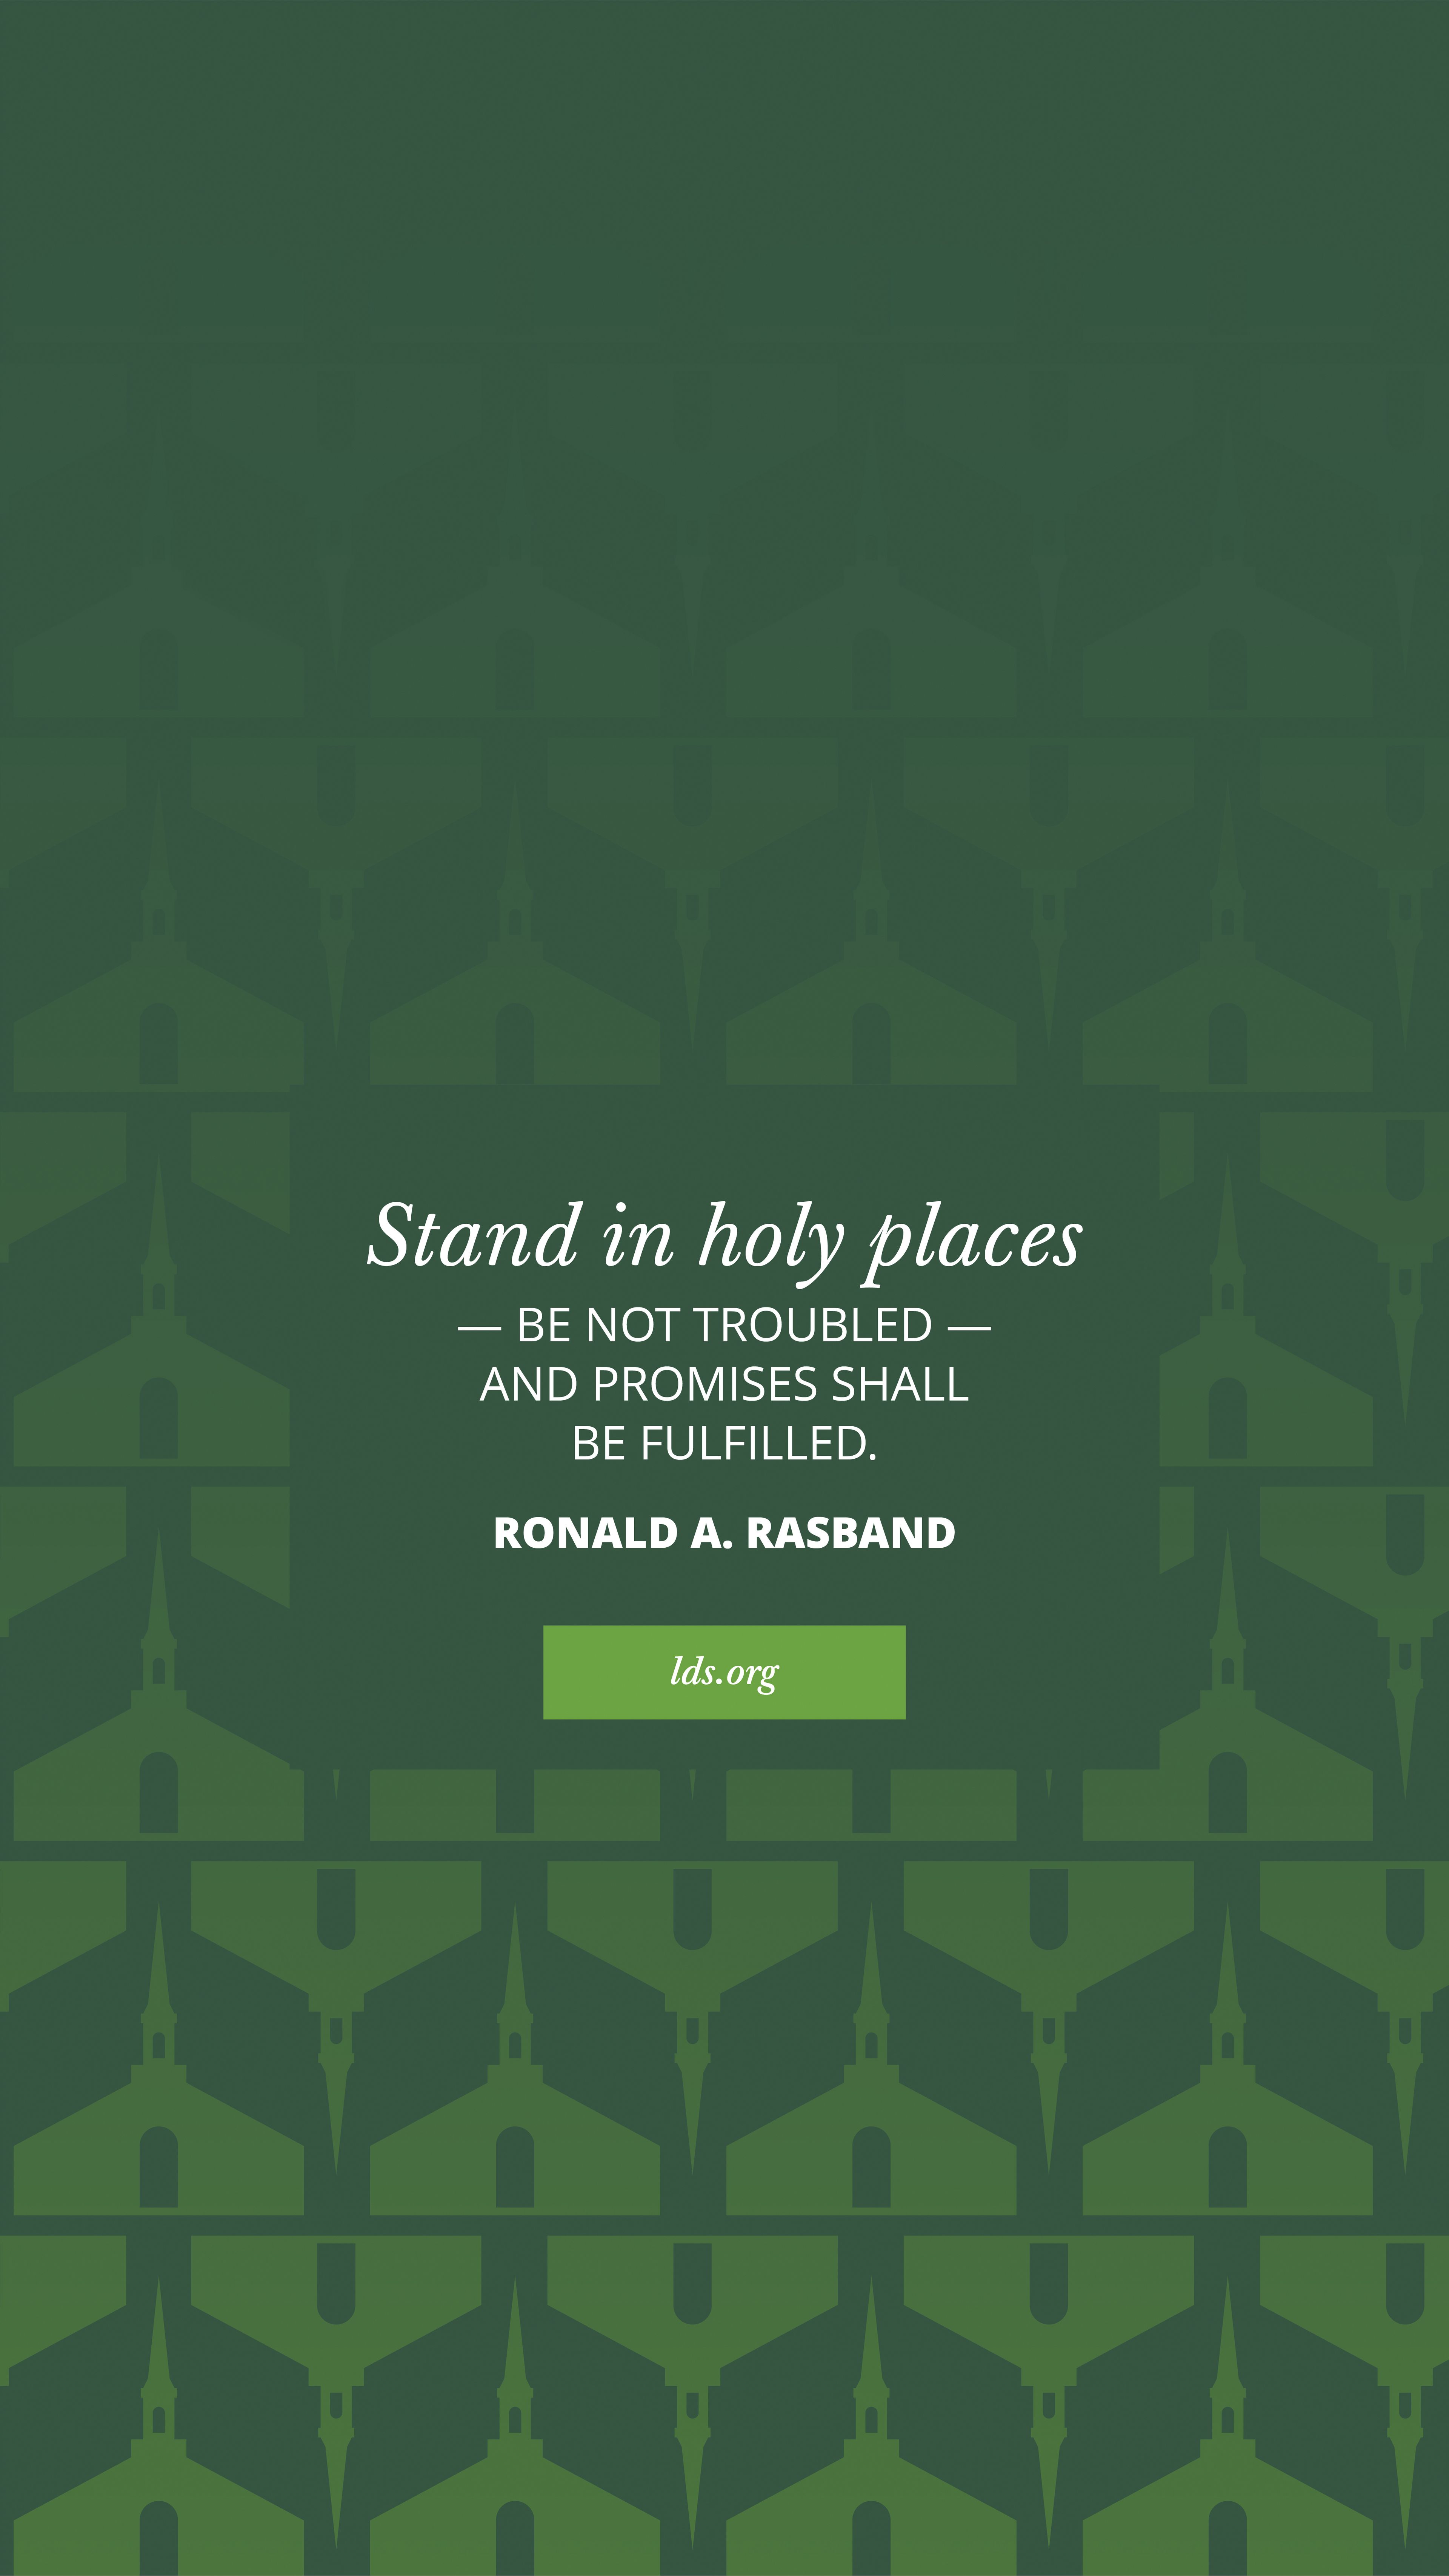 “Stand in holy places—be not troubled—and promises shall be fulfilled.”—Ronald A. Rasband, “Be Not Troubled”